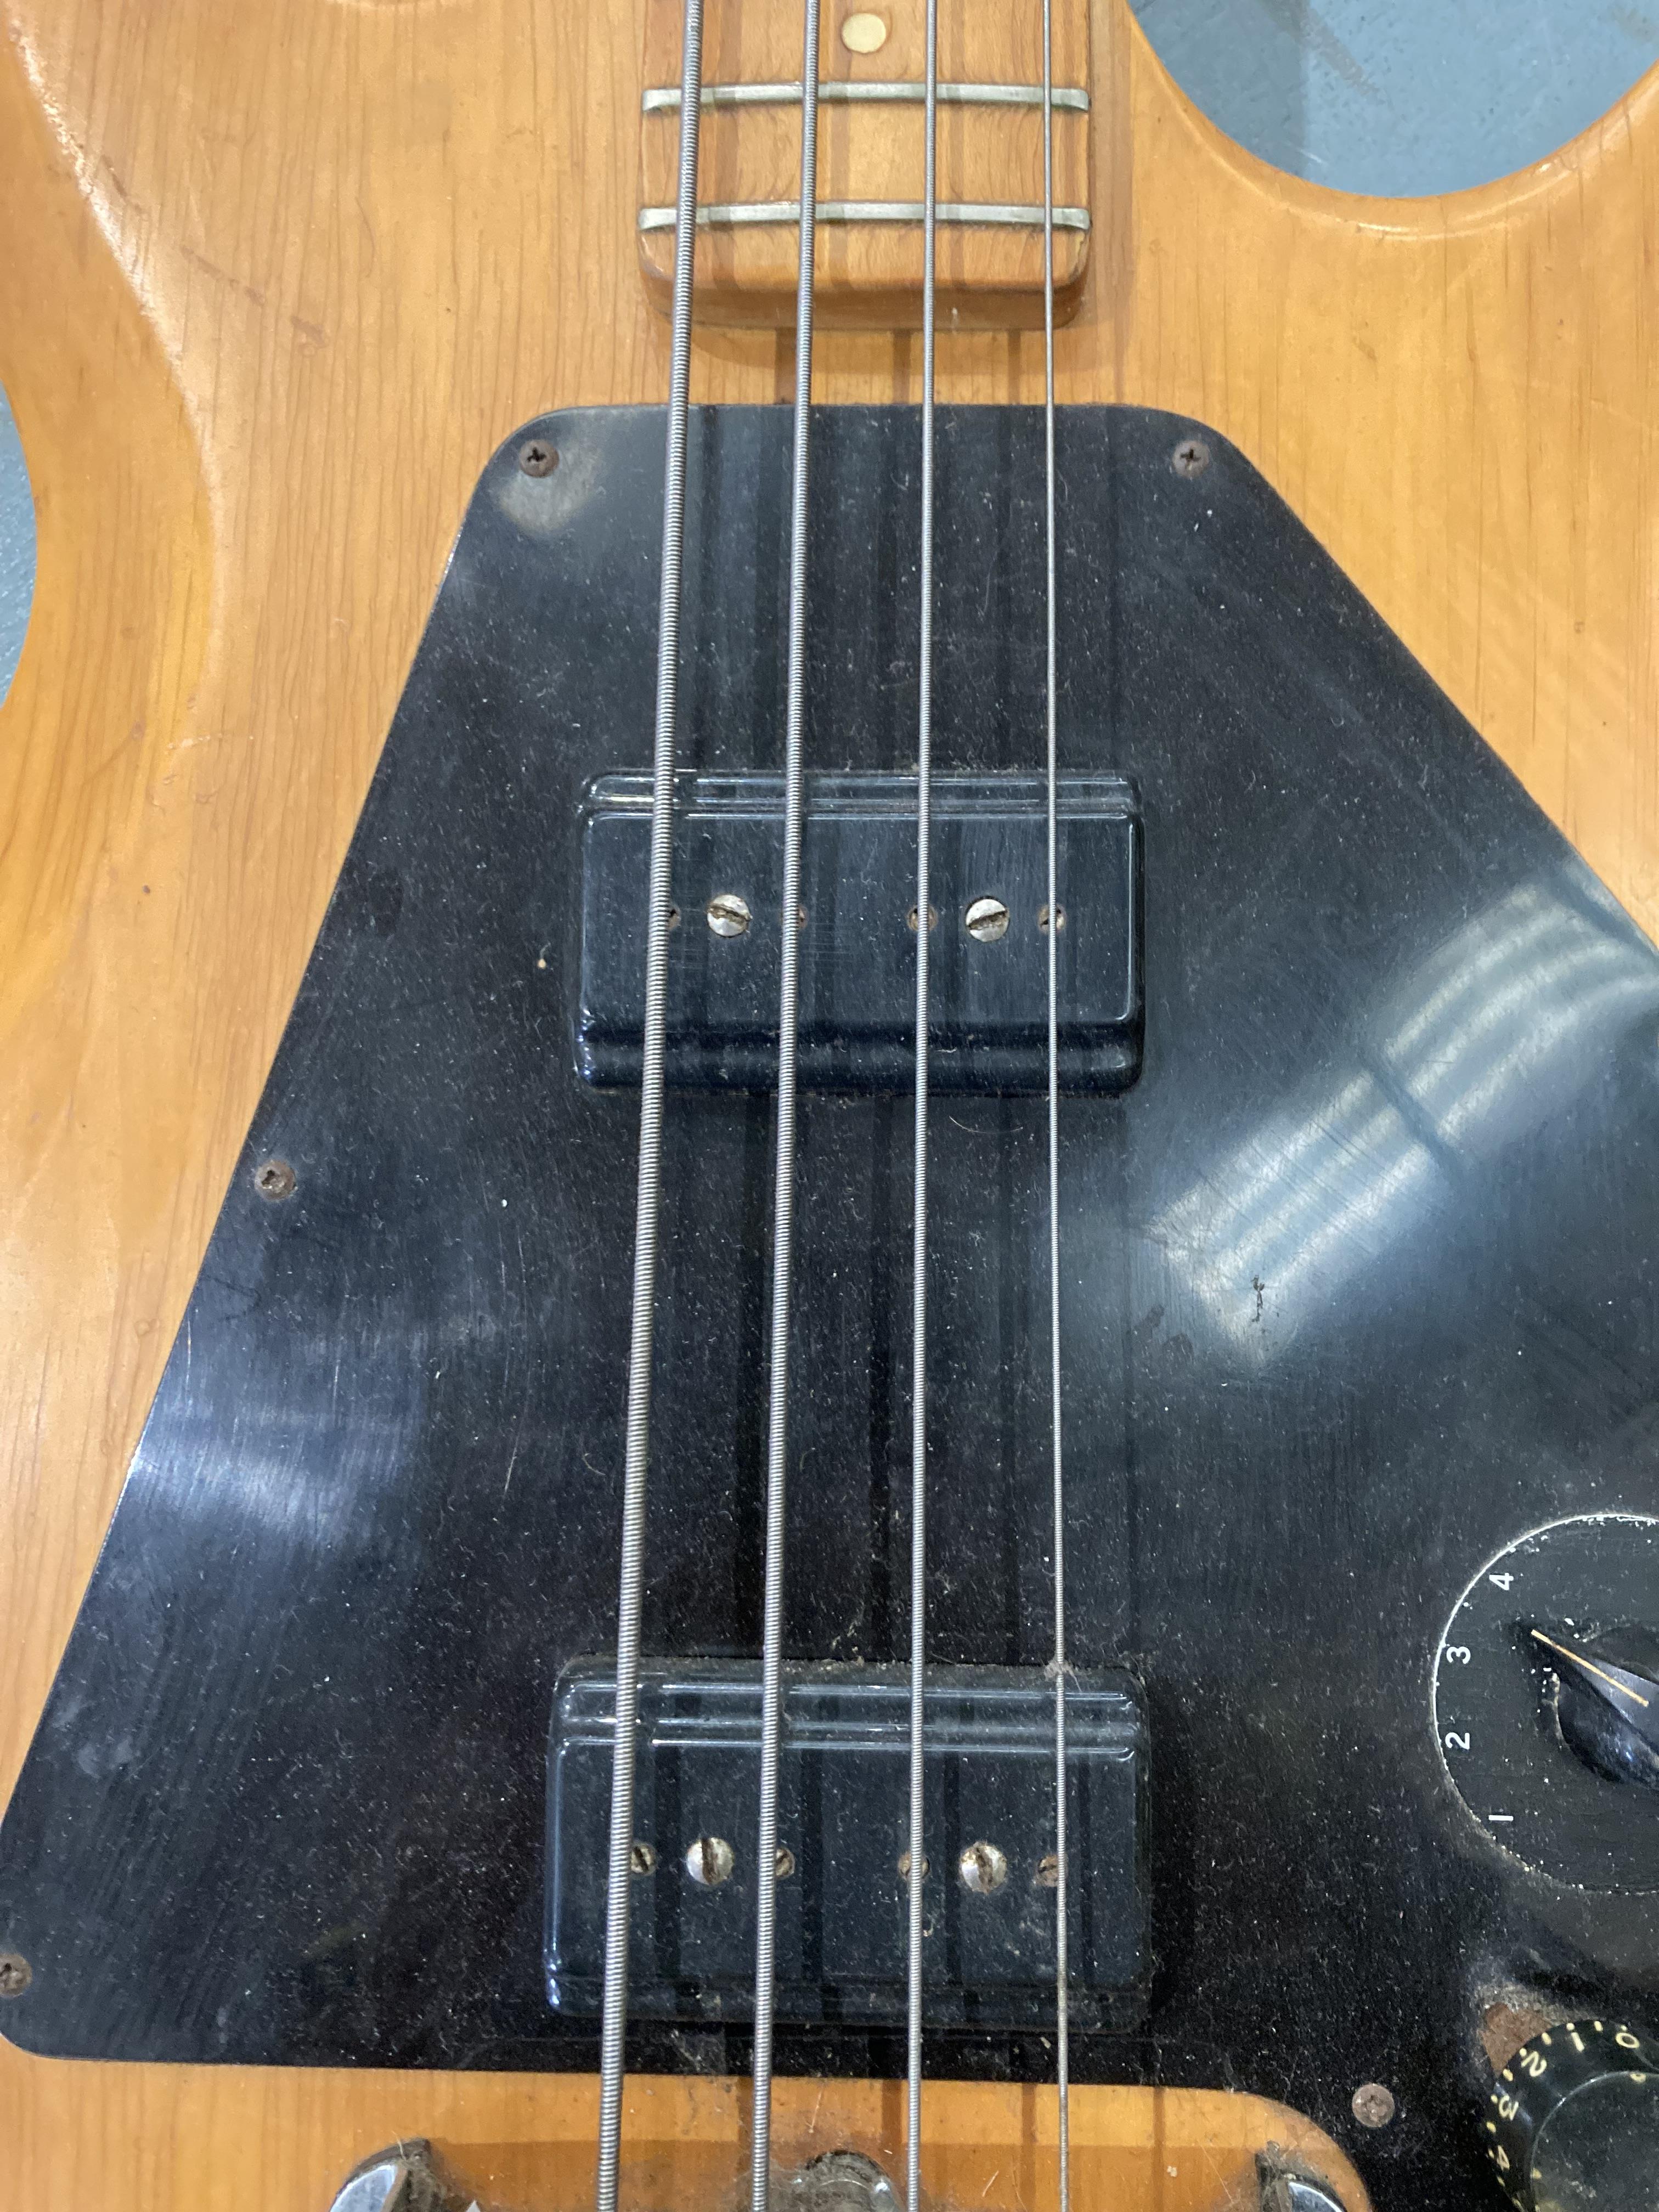 Gibson 'The Ripper' 1970's bass guitar, - Image 10 of 38